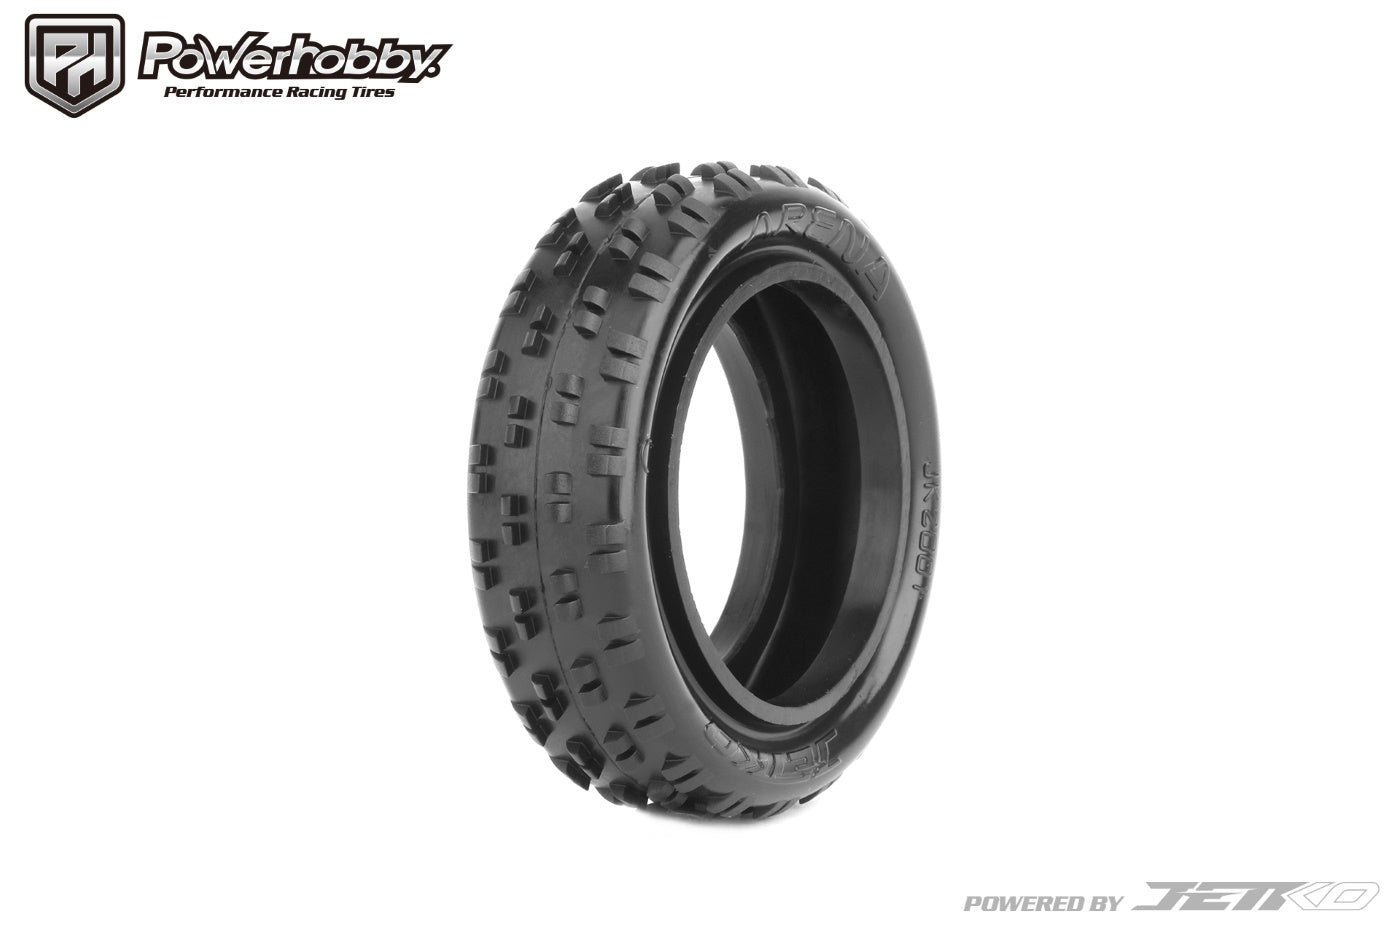 Powerhobby Arena 1/10 2WD Front Buggy Carpet Tires Soft - PowerHobby